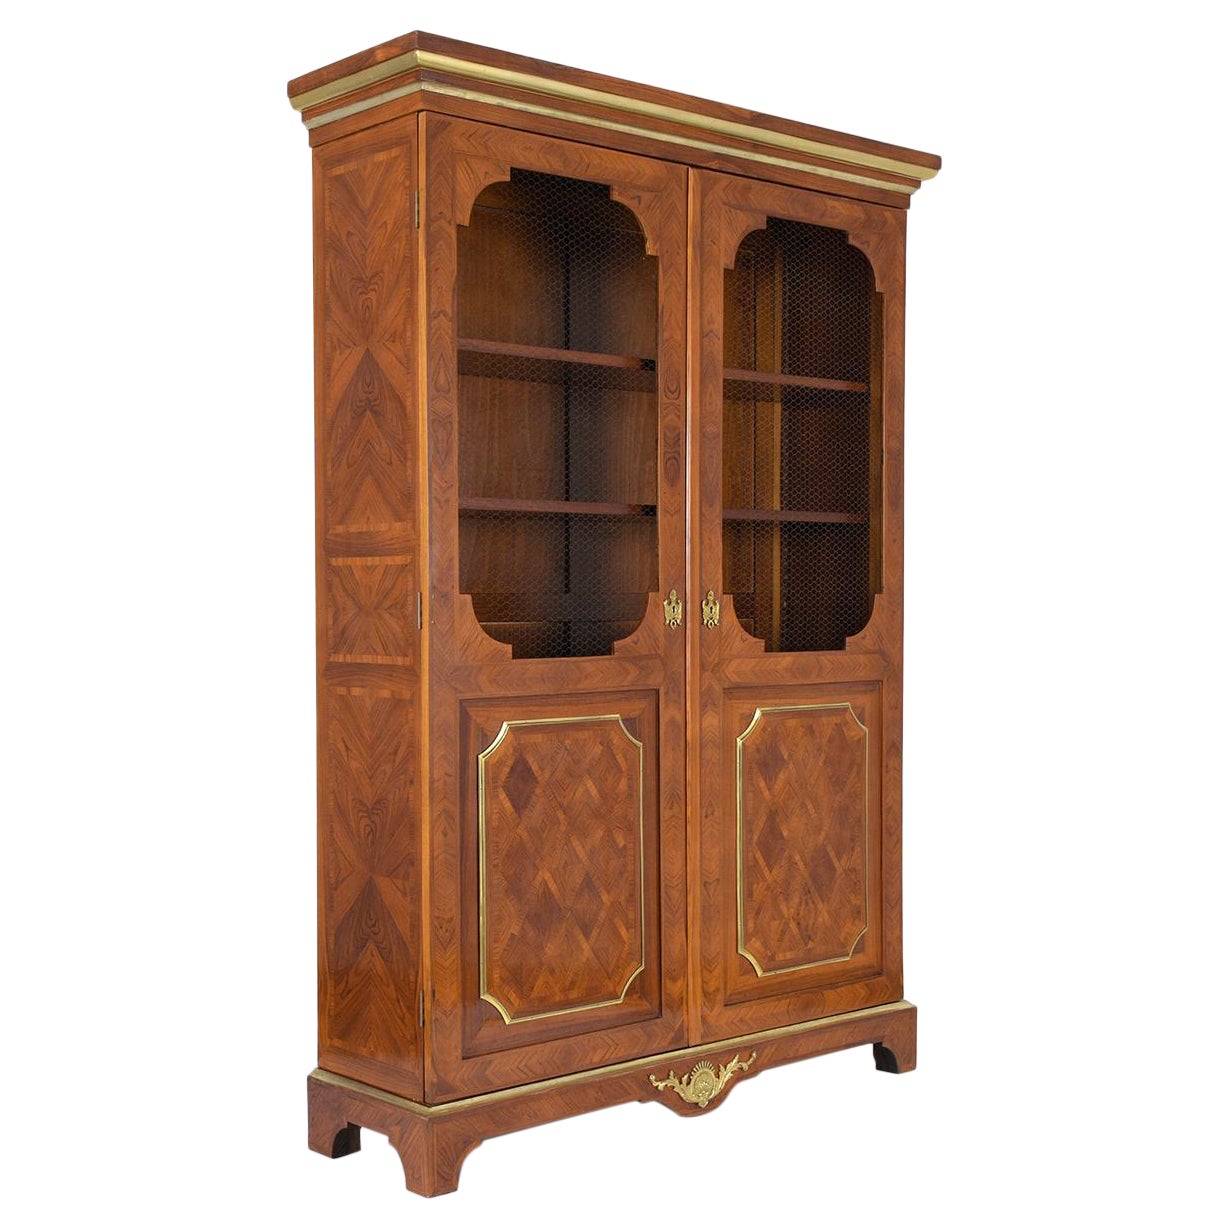 Antique French Louis XVI-Style Walnut Bookcase with Marquetry and Brass Details